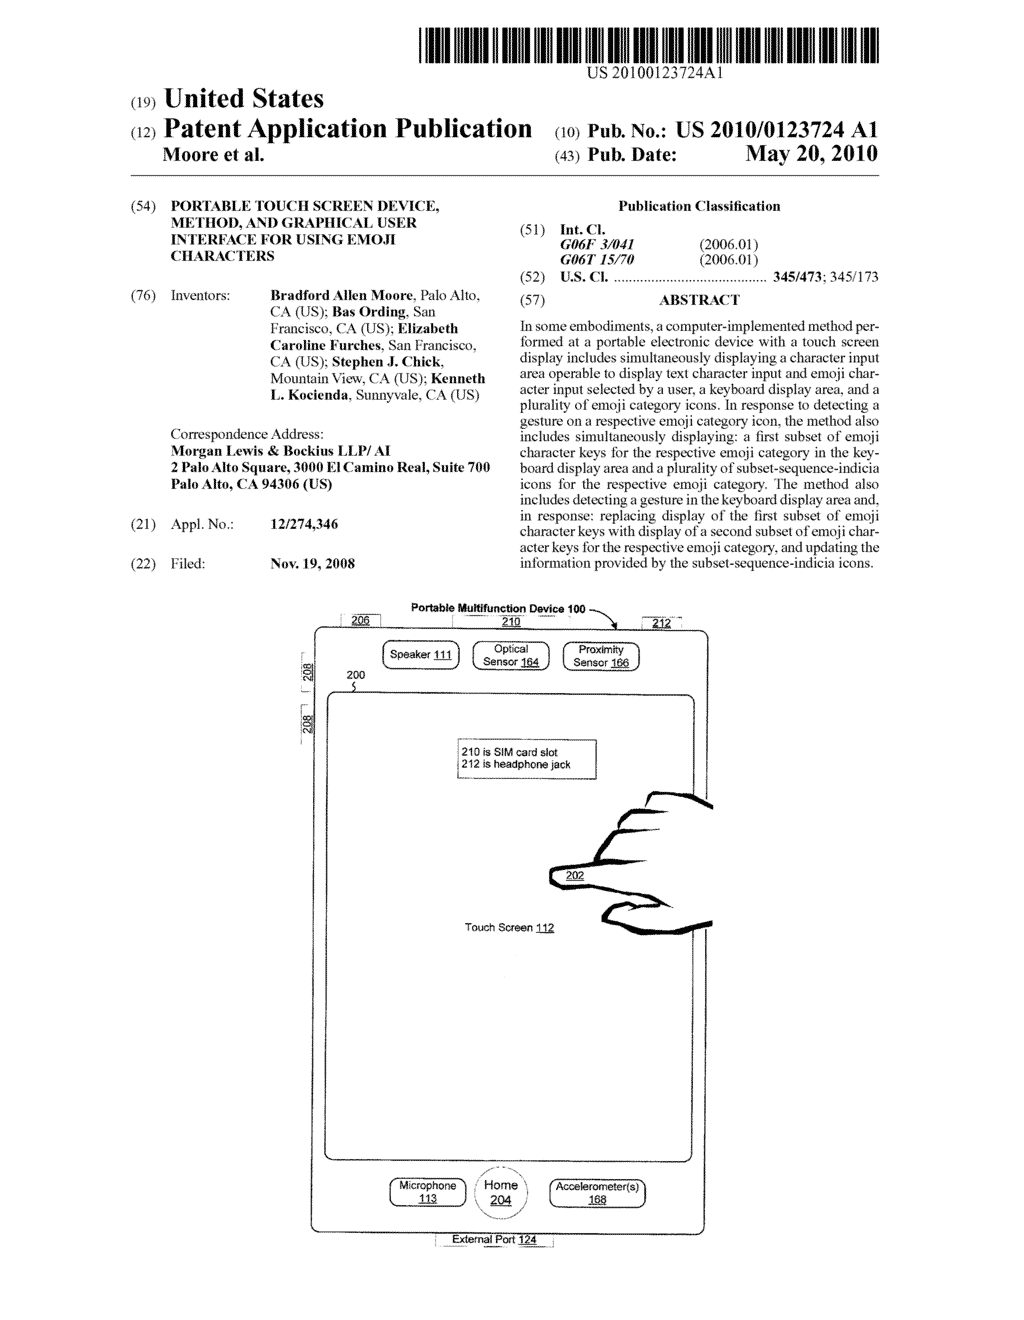 Portable Touch Screen Device, Method, and Graphical User Interface for Using Emoji Characters - diagram, schematic, and image 01